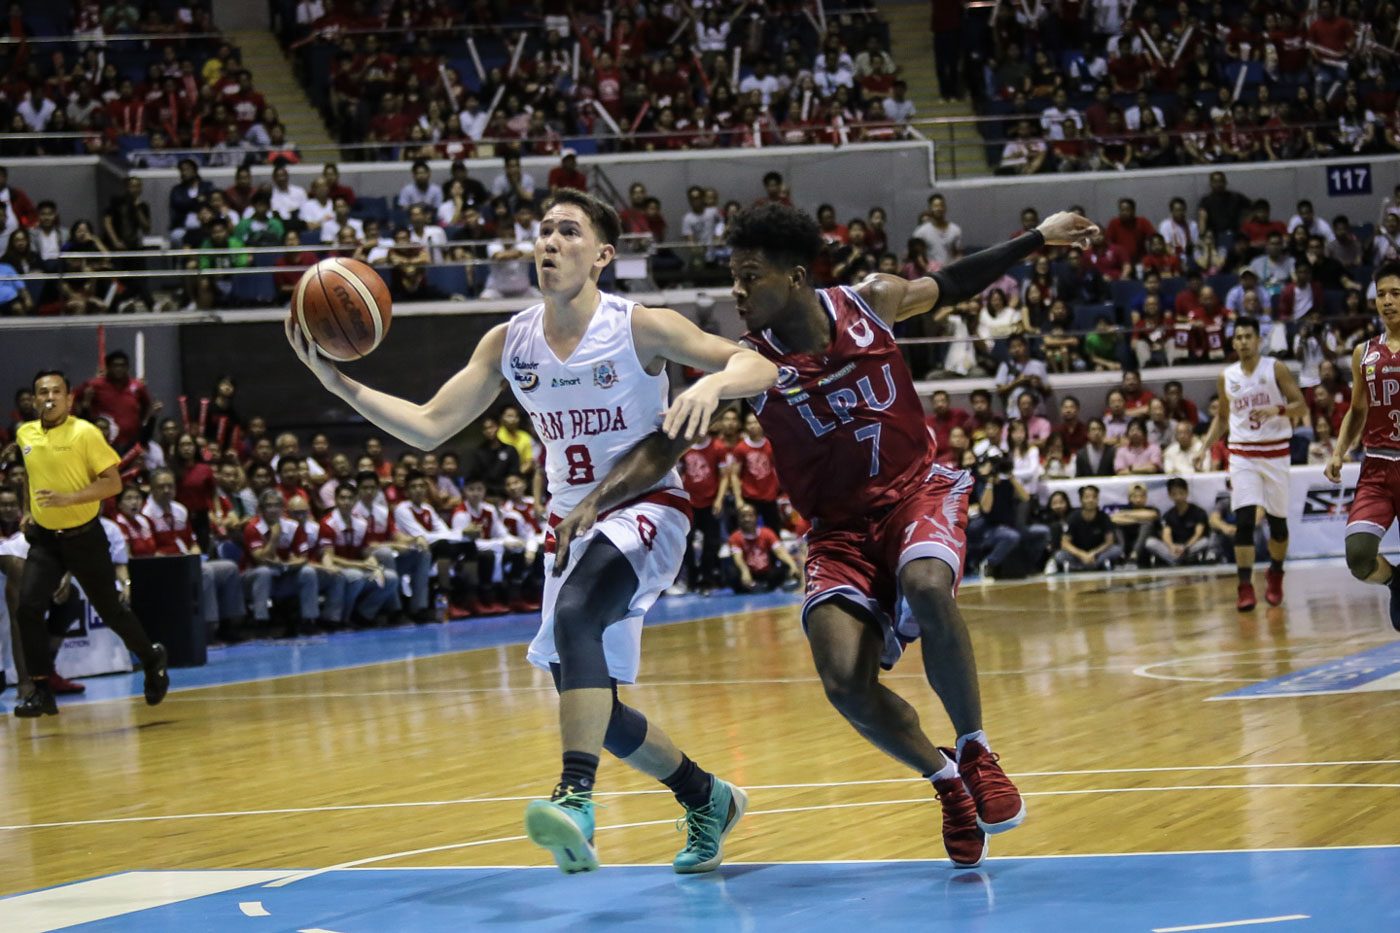 San Beda Red Lions turn back Lyceum Pirates to claim the NCAA season 93 crown